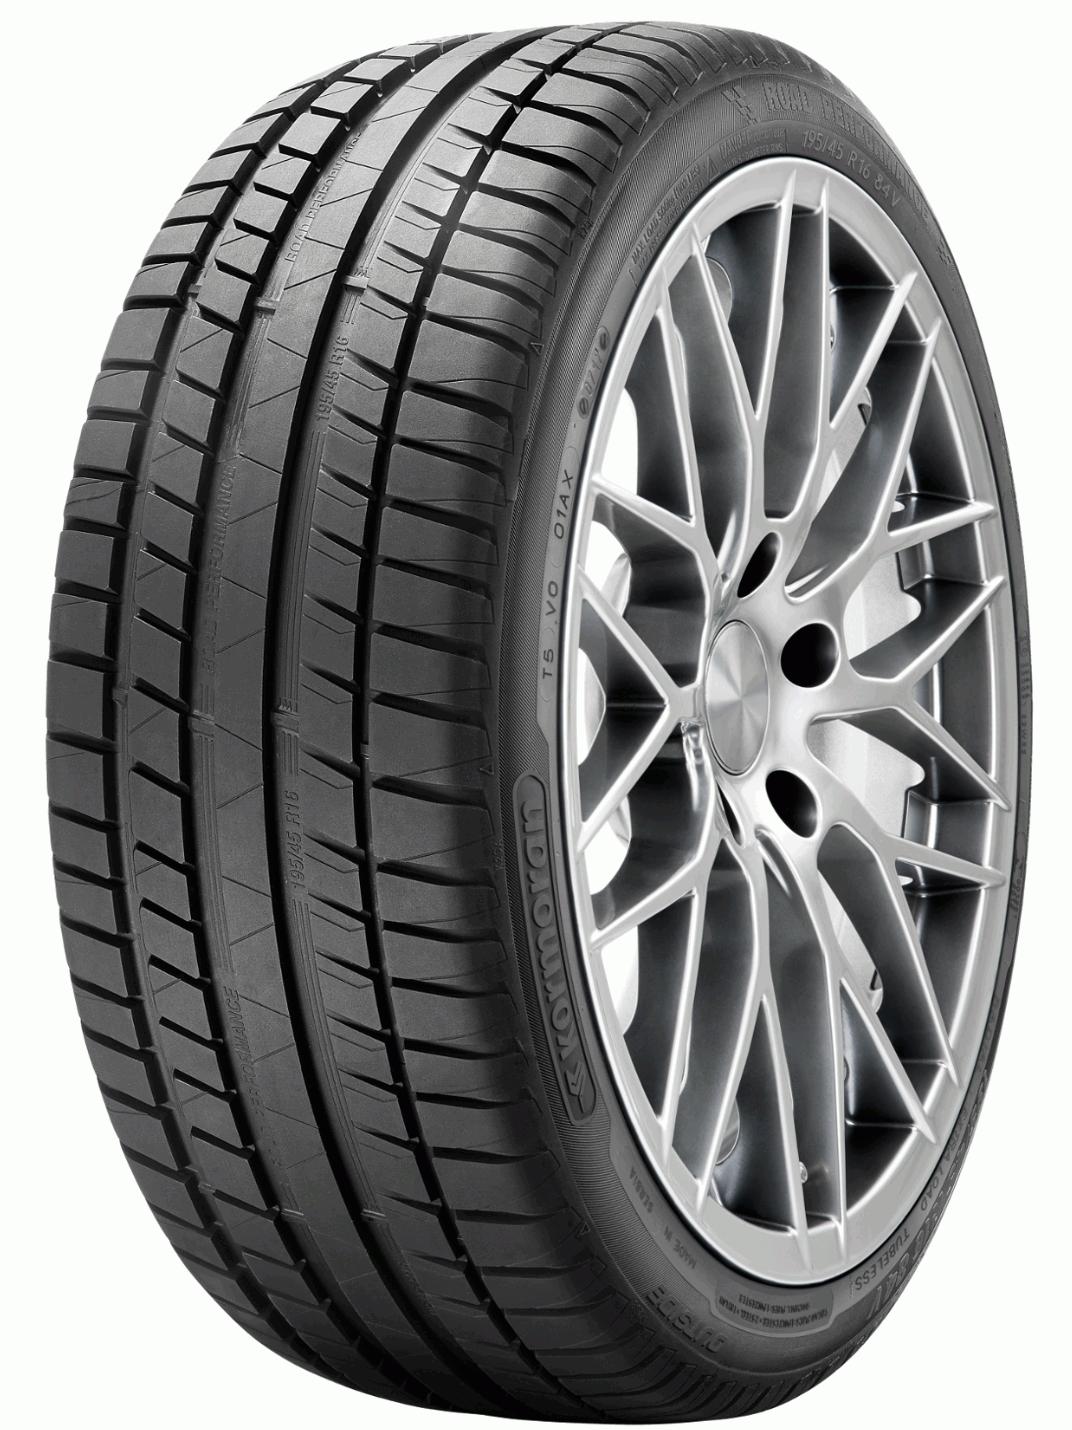 Riken Road Performance - Tire Reviews and Tests